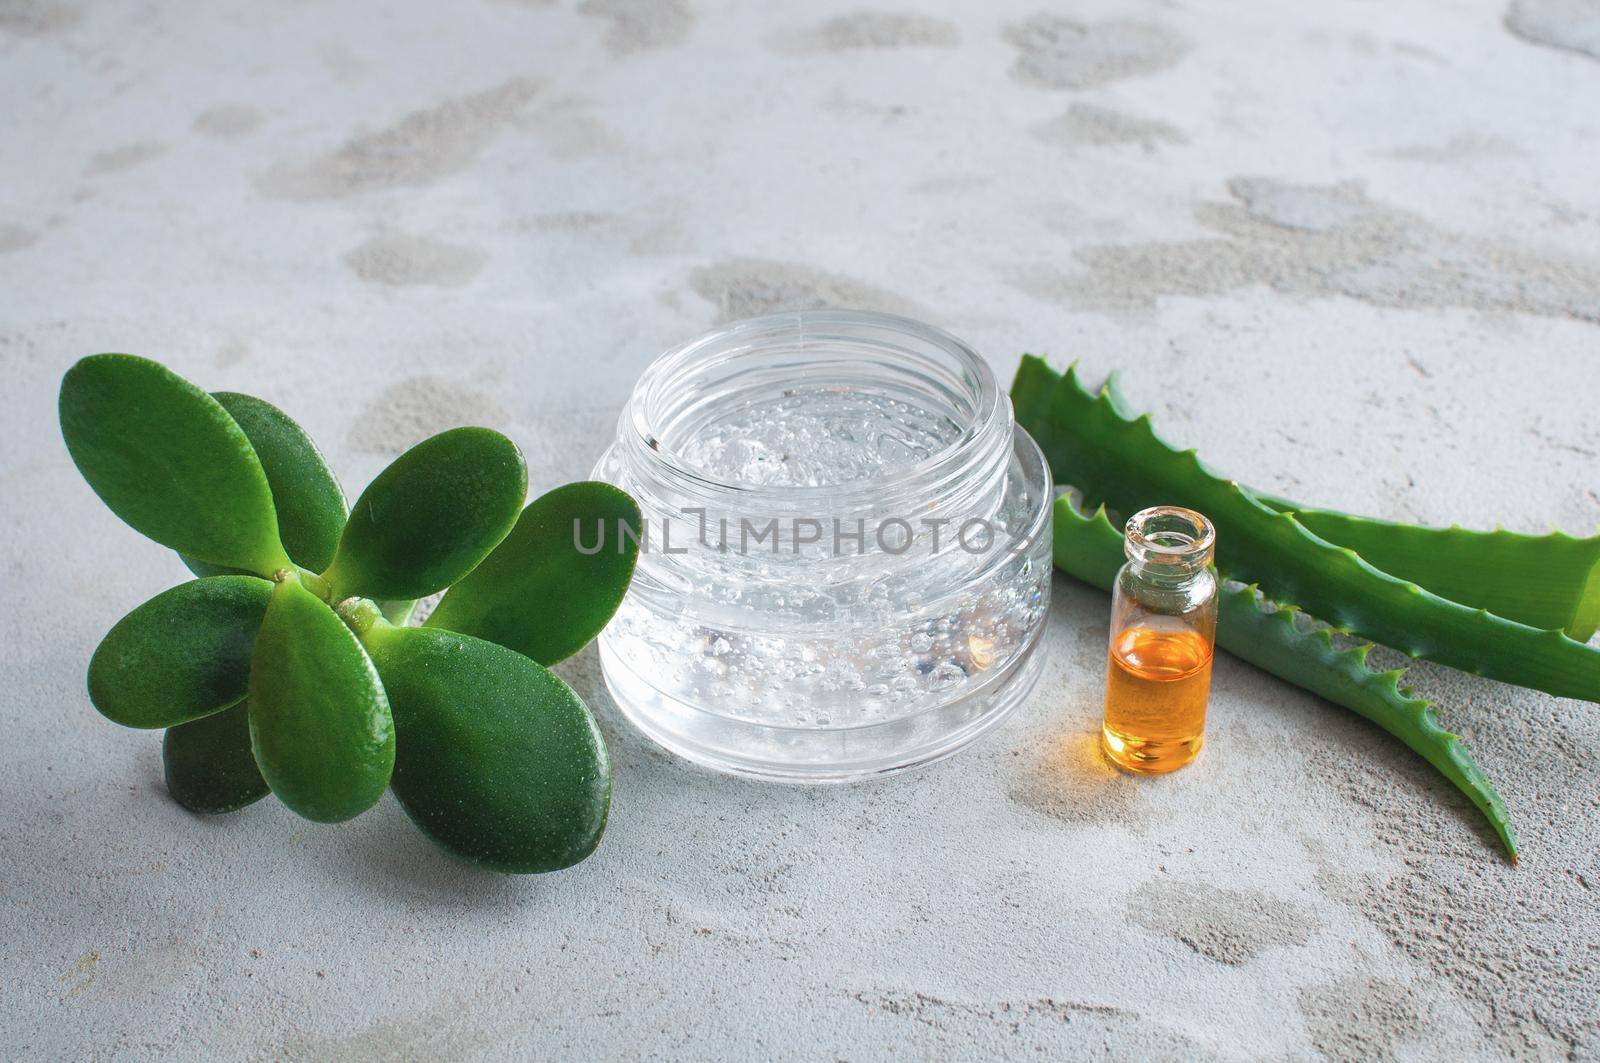 Transparent jar with cosmetic moisturizing gel with hyaluronic acid with bubbles and vitamins in capsules